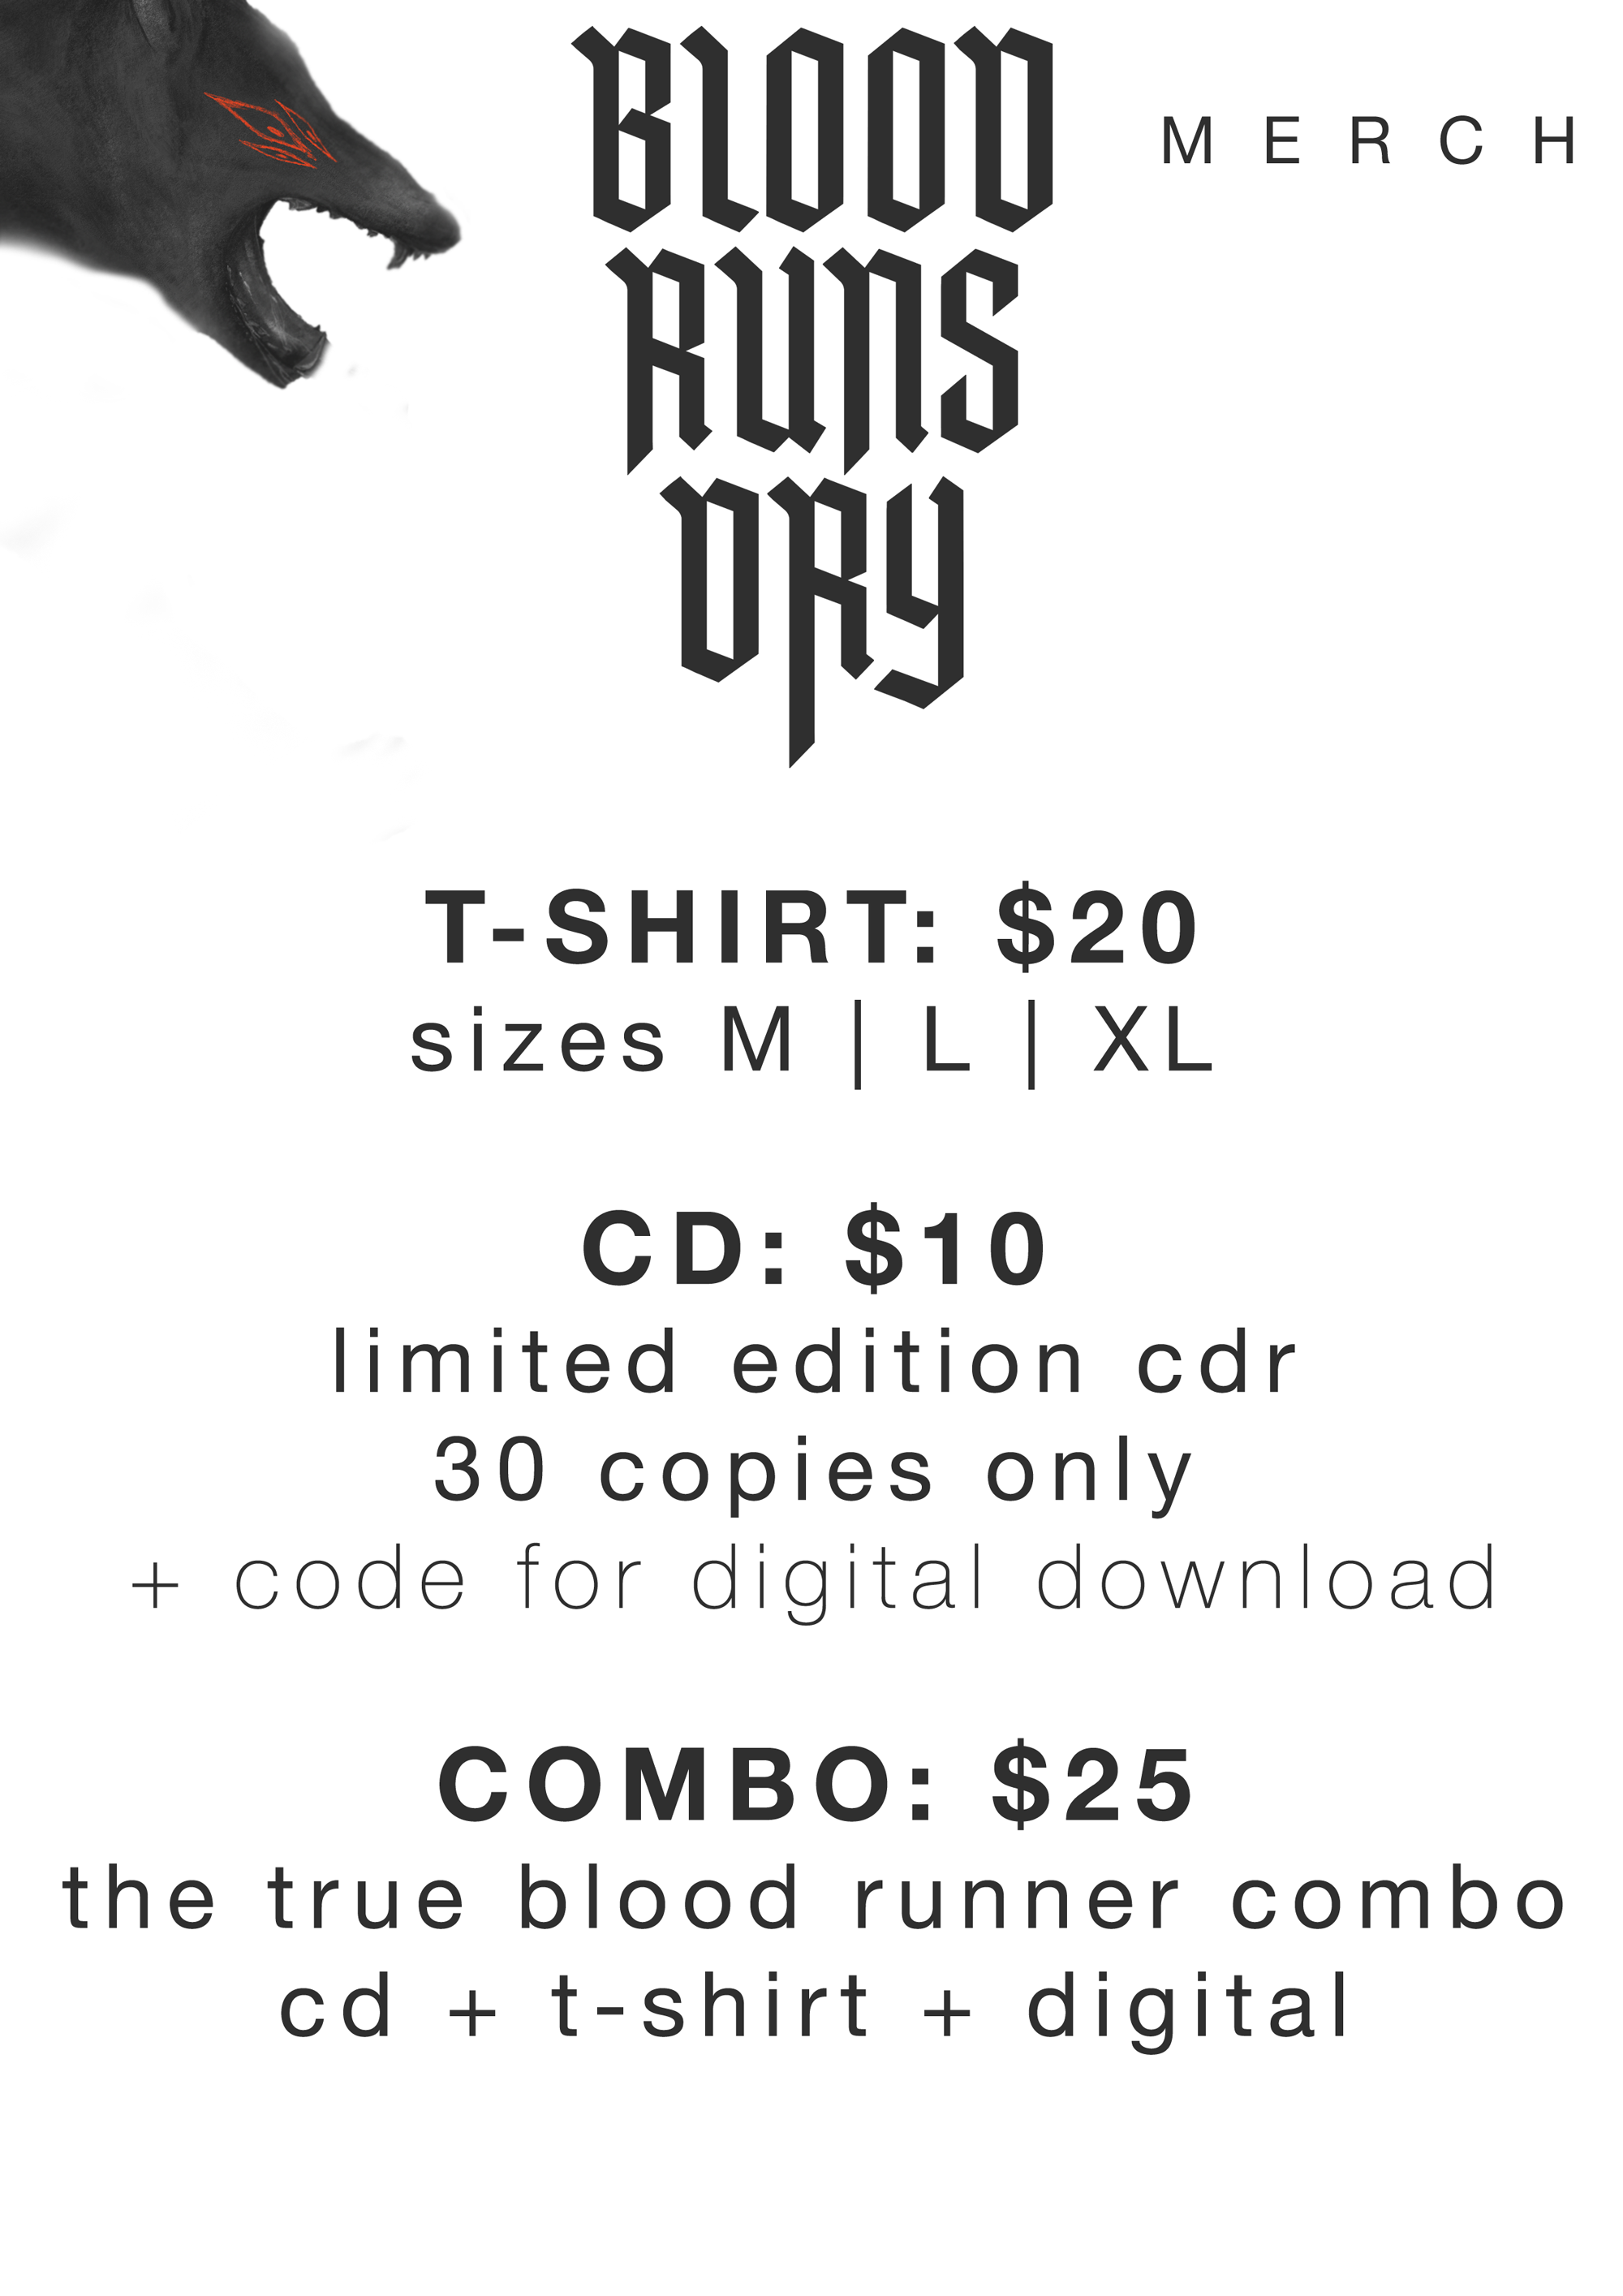 BLOOD RUNS DRY merch is available now!